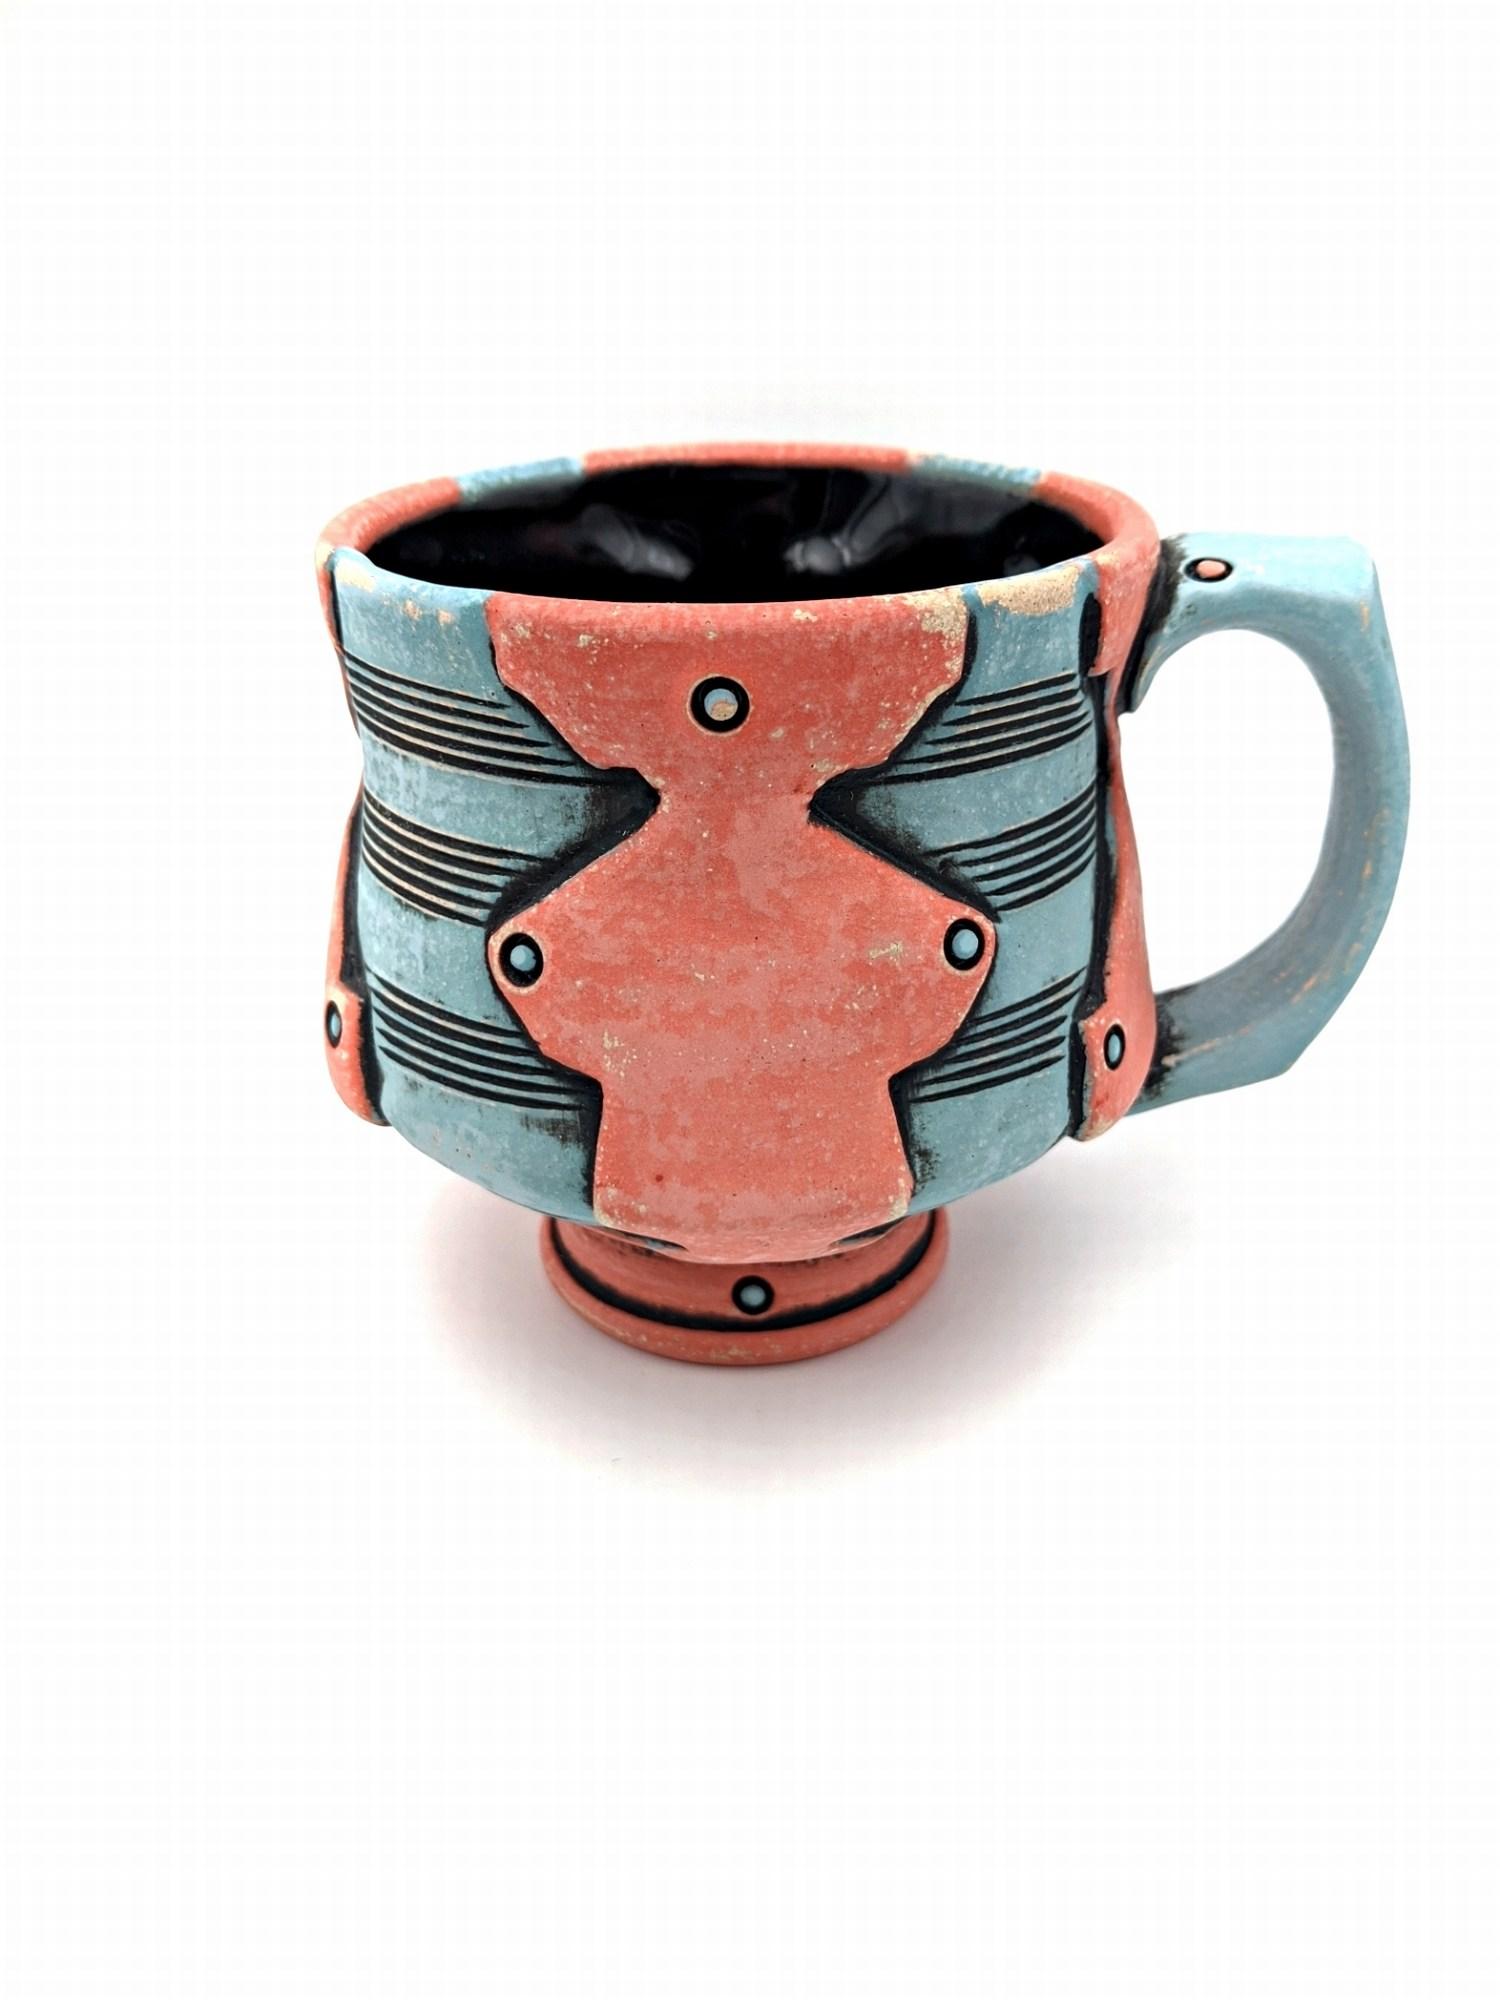 Coffee Mug - Sculpture by Andrew Clark